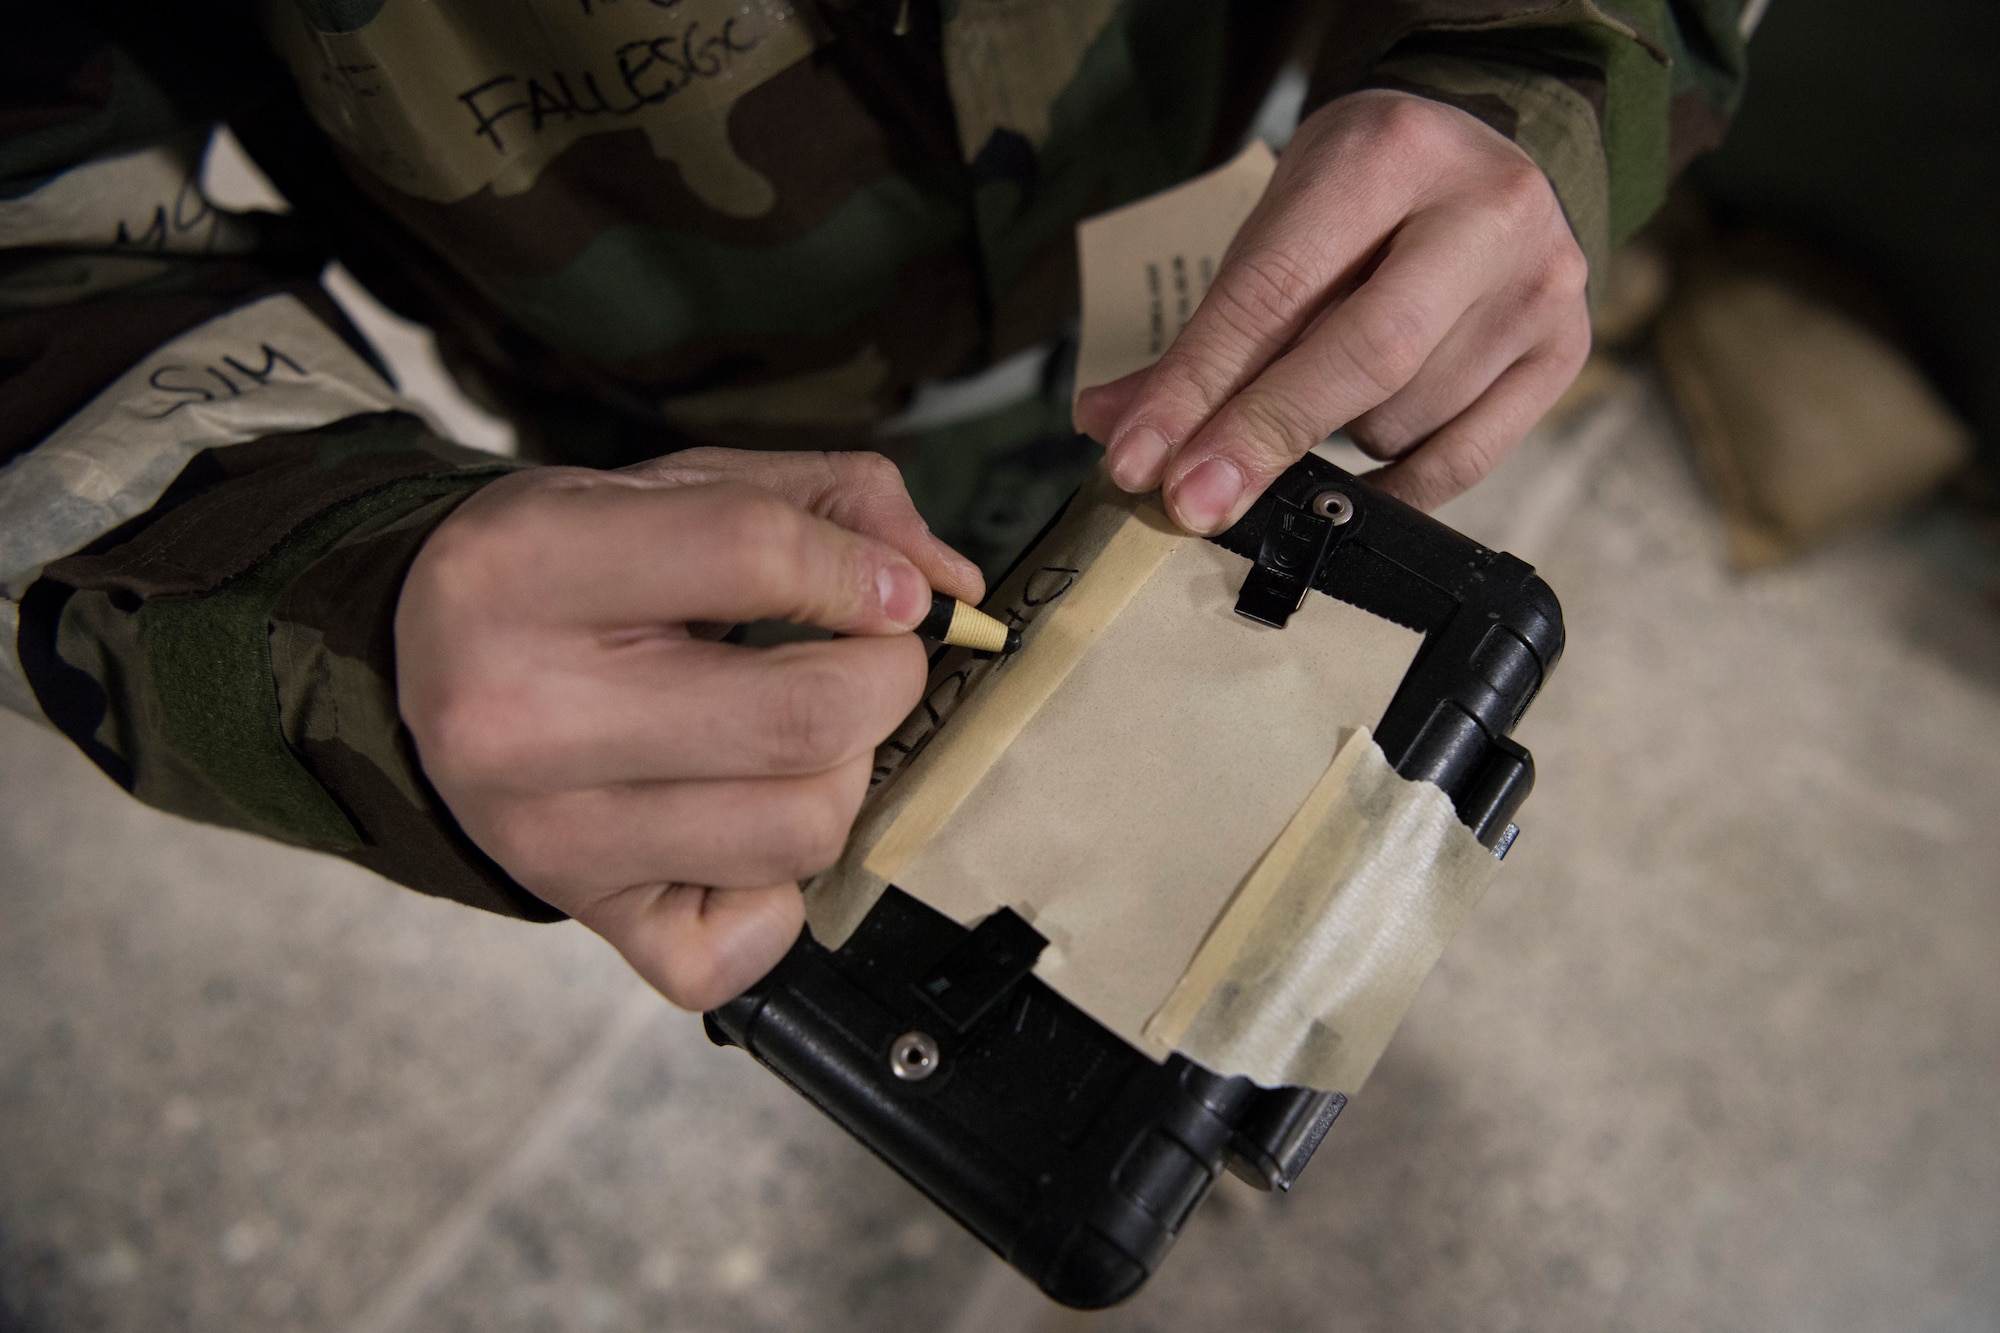 U.S. Air Force Tech. Sgt. John Fallesgon, 673d Force Support Squadron Fitness Assessment Cell noncommissioned officer in charge, writes on M-8 paper during a newly-implemented chemical, biological, radiological and nuclear defense training course exercise at Joint Base Elmendorf-Richardson, Alaska, Jan. 8, 2019. One of the key changes made embraces the reintegration of hands-on, in-person instruction, and reduces computer based training, allowing Airmen to receive a more tailored learning experience. (U.S. Air Force photo by Airman 1st Class Crystal A. Jenkins)